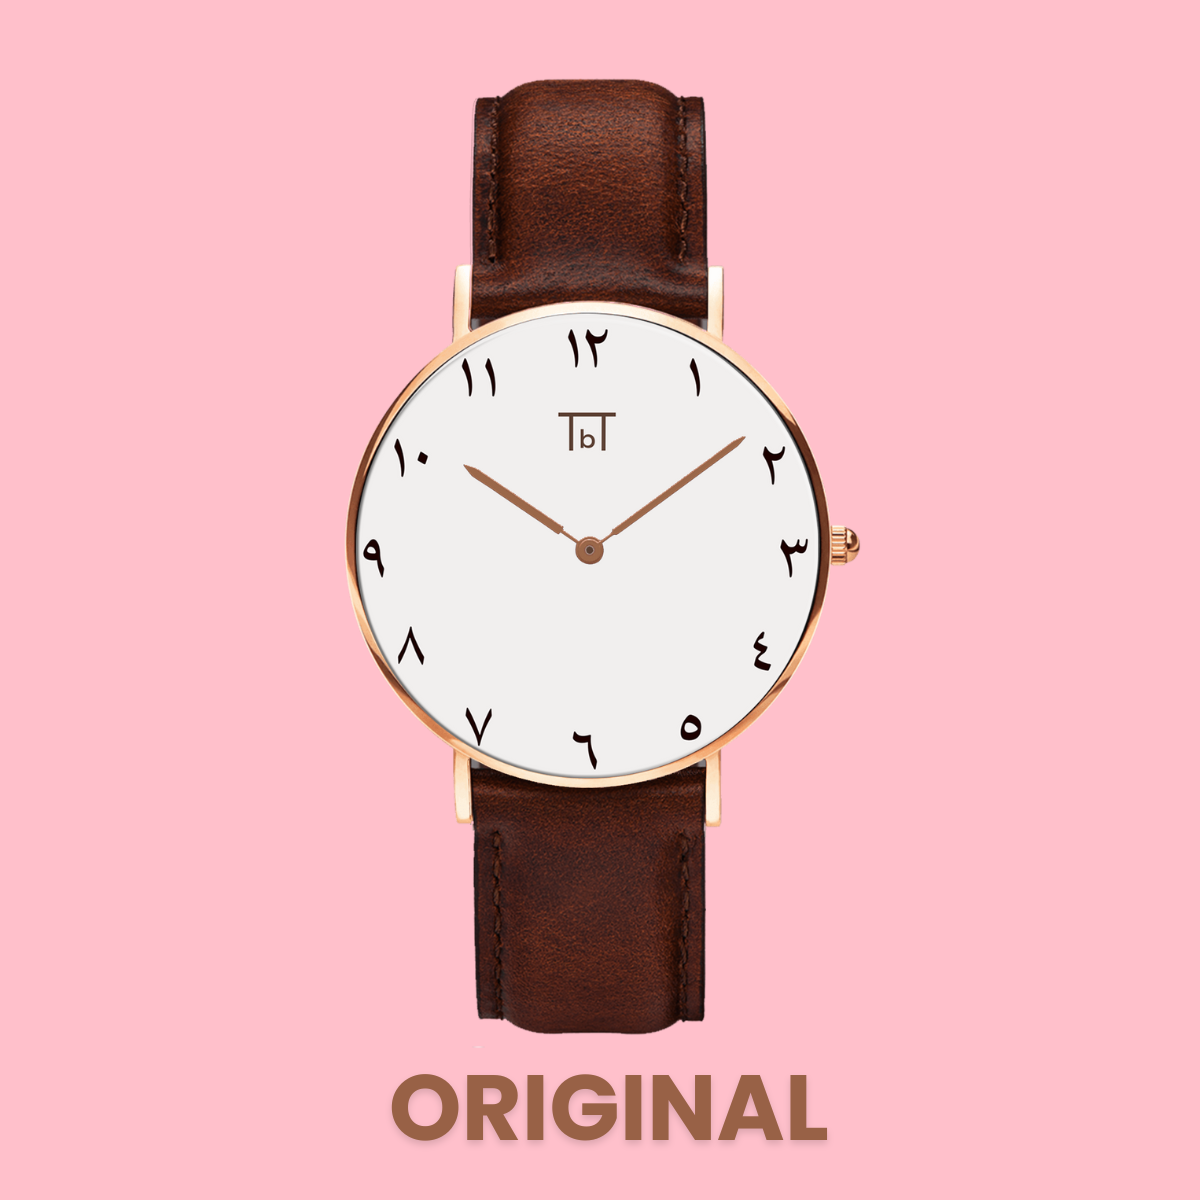 Arabic Rose Gold White with Brown Leather Strap FOR HER